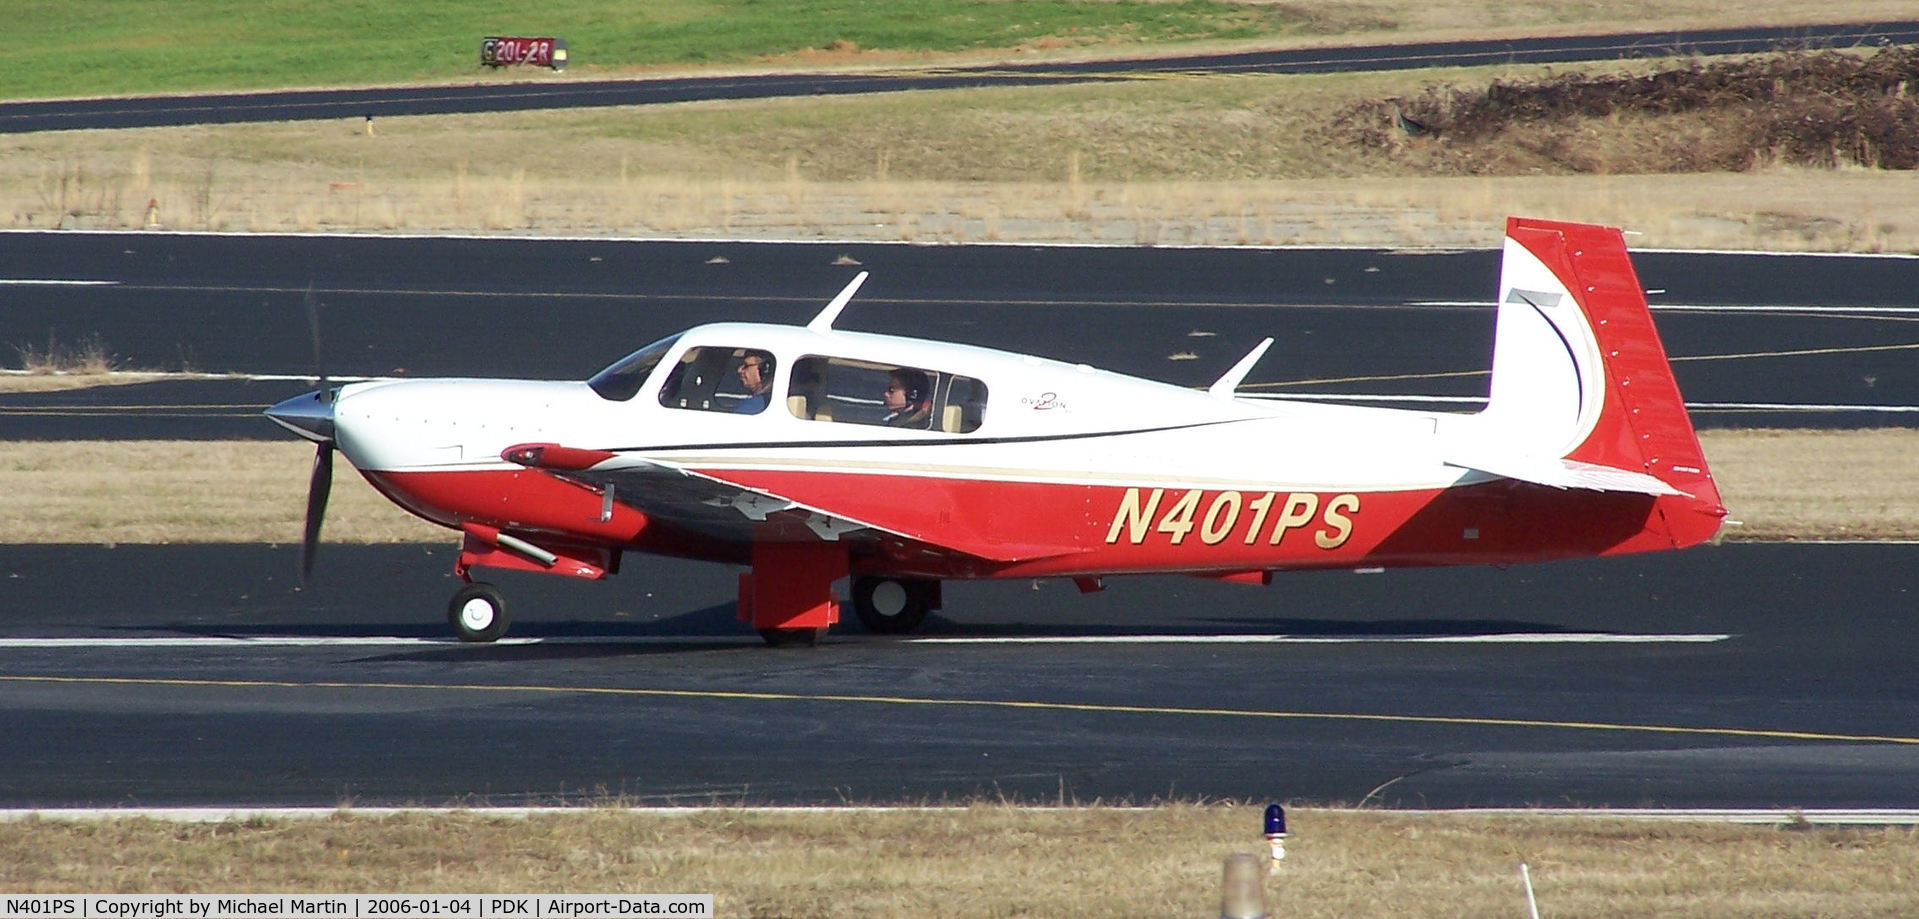 N401PS, 2005 Mooney M20R Ovation C/N 29-0401, Taxing to Epps Air Service